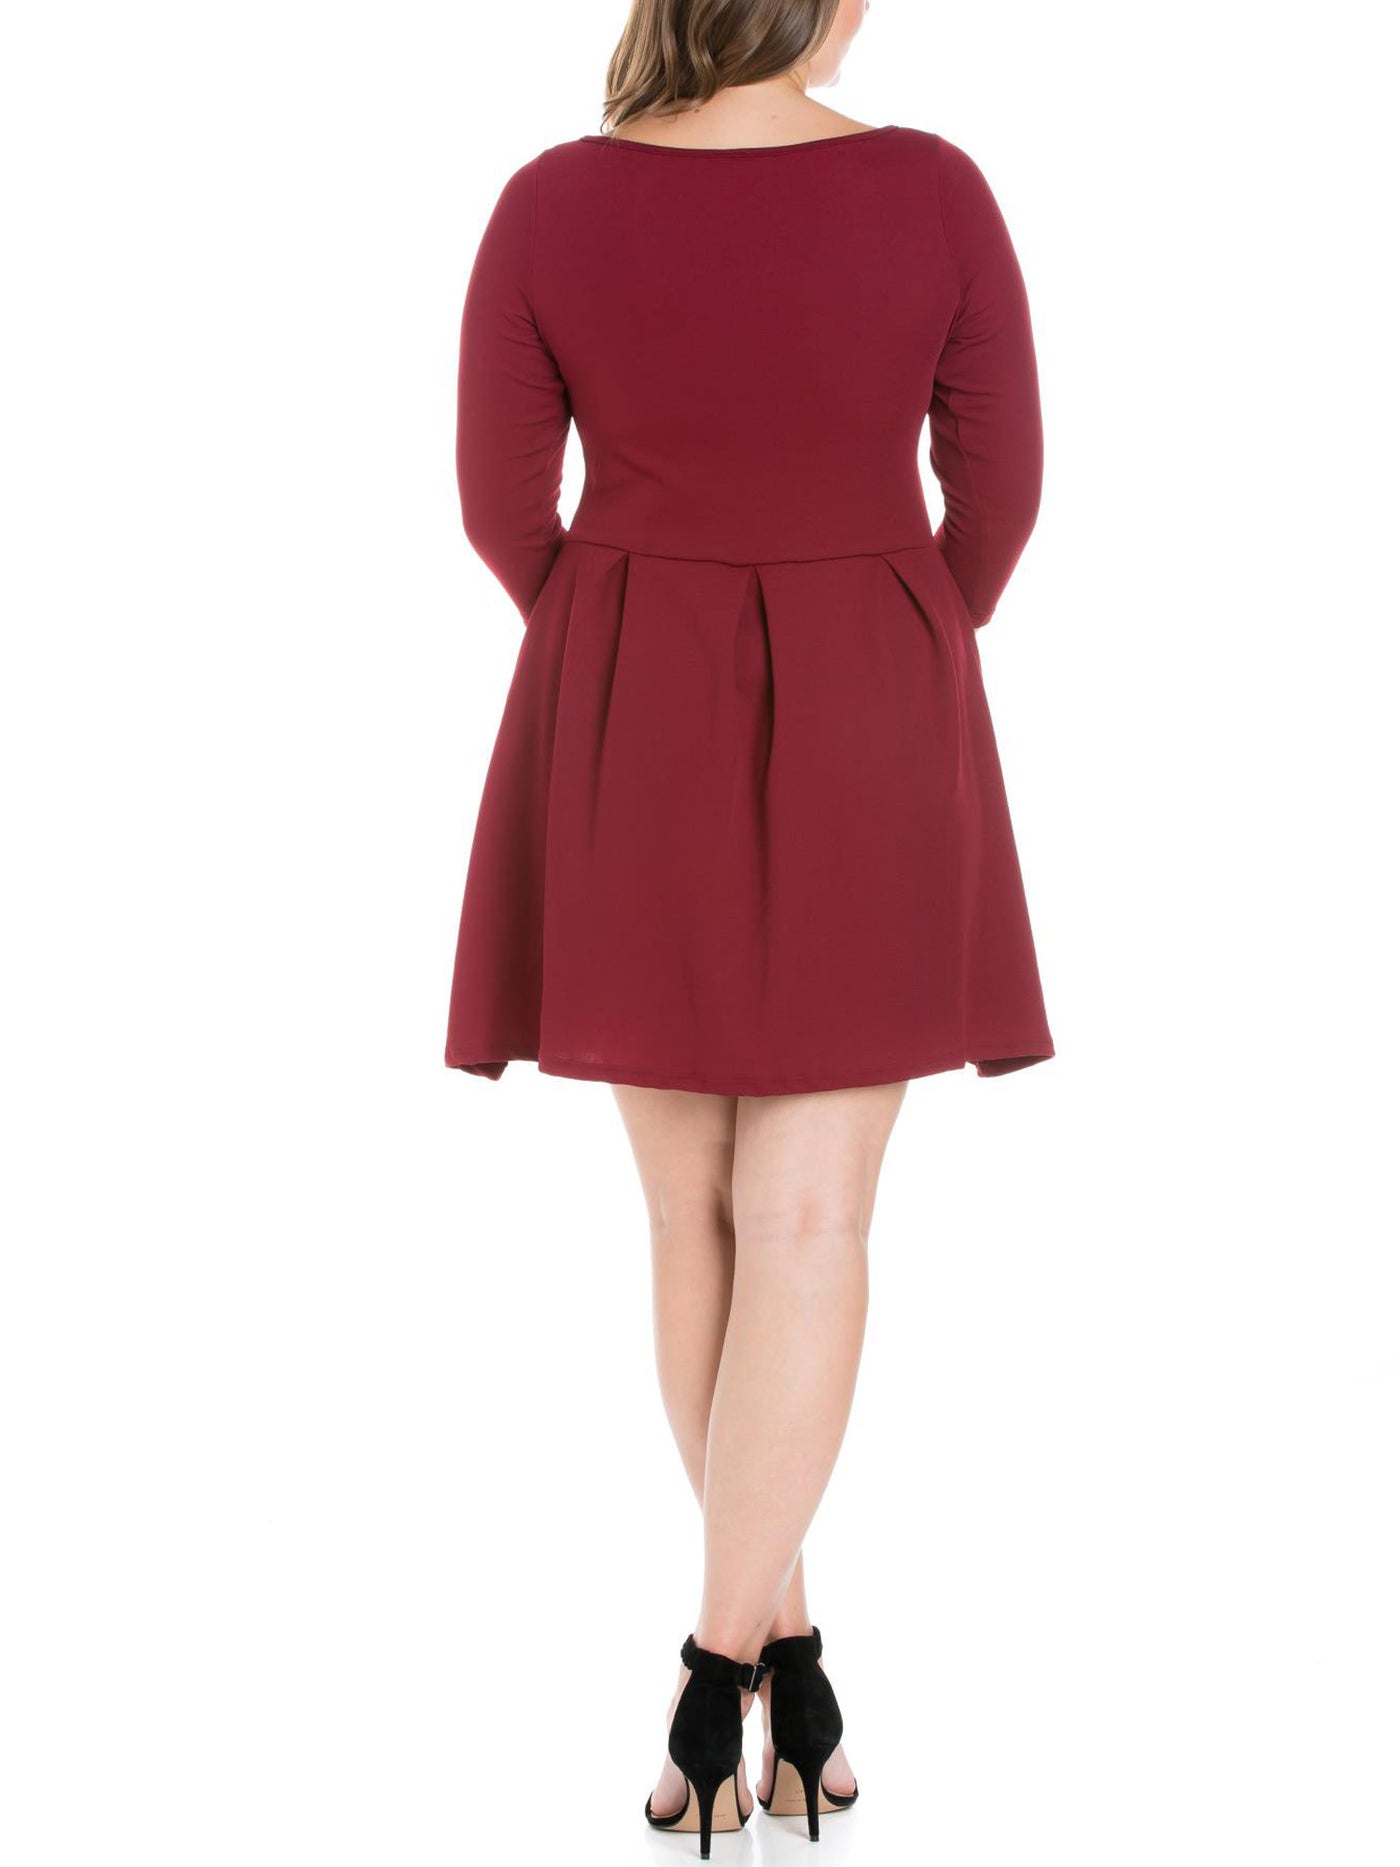 24/7 COMFORT Womens Burgundy Pocketed Pleated Pullover 3/4 Sleeve Boat Neck Above The Knee Fit + Flare Dress Plus 1X